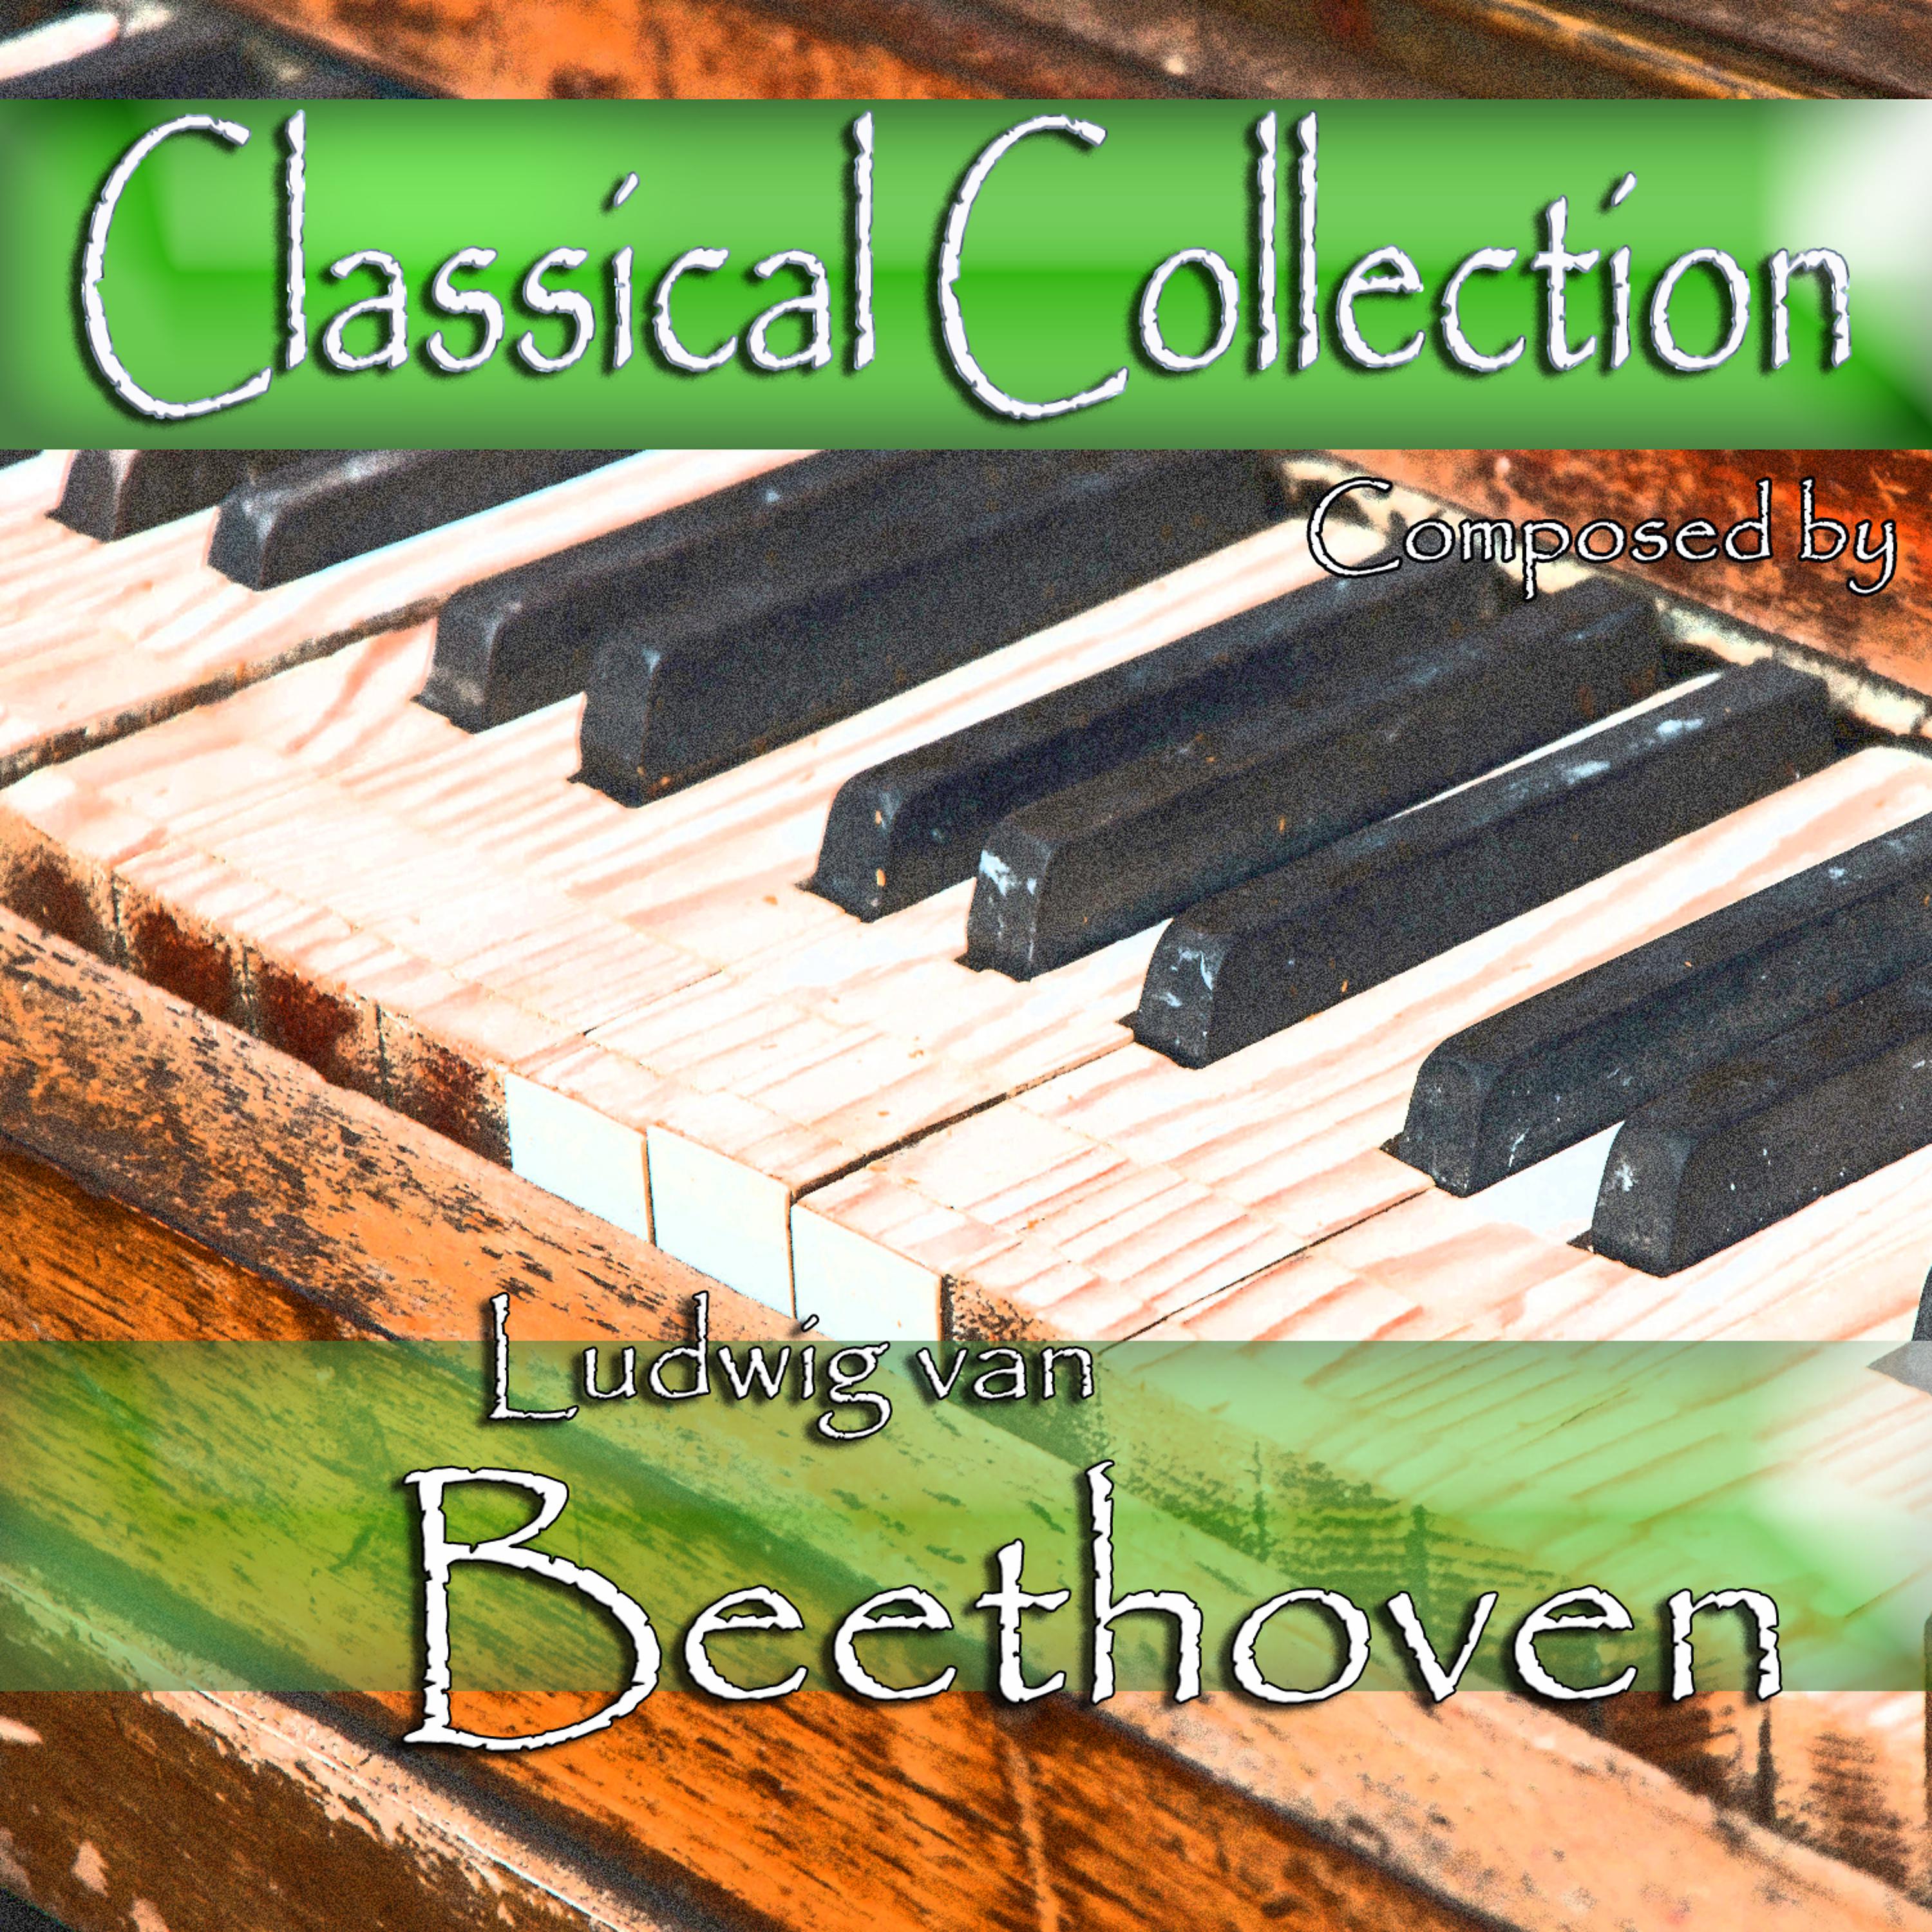 Постер альбома Classical Collection Composed by Ludwig van Beethoven